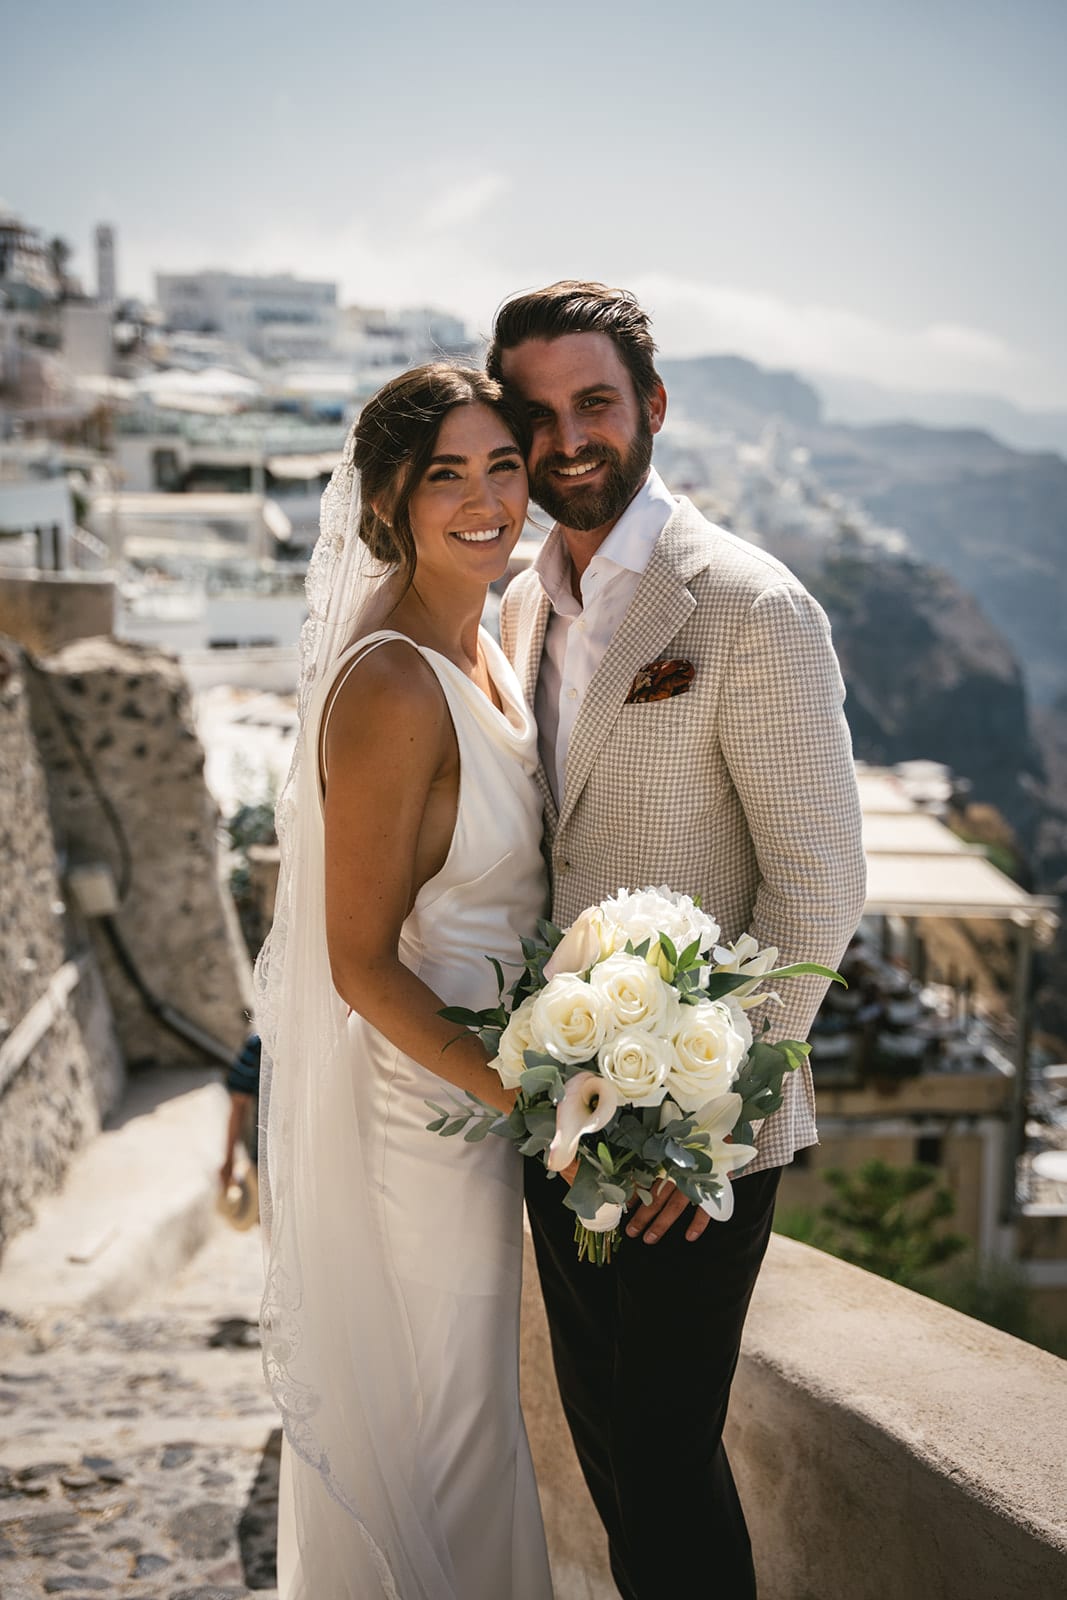 Intimate glances shared in Fira’s embrace, their love story entwined with the town